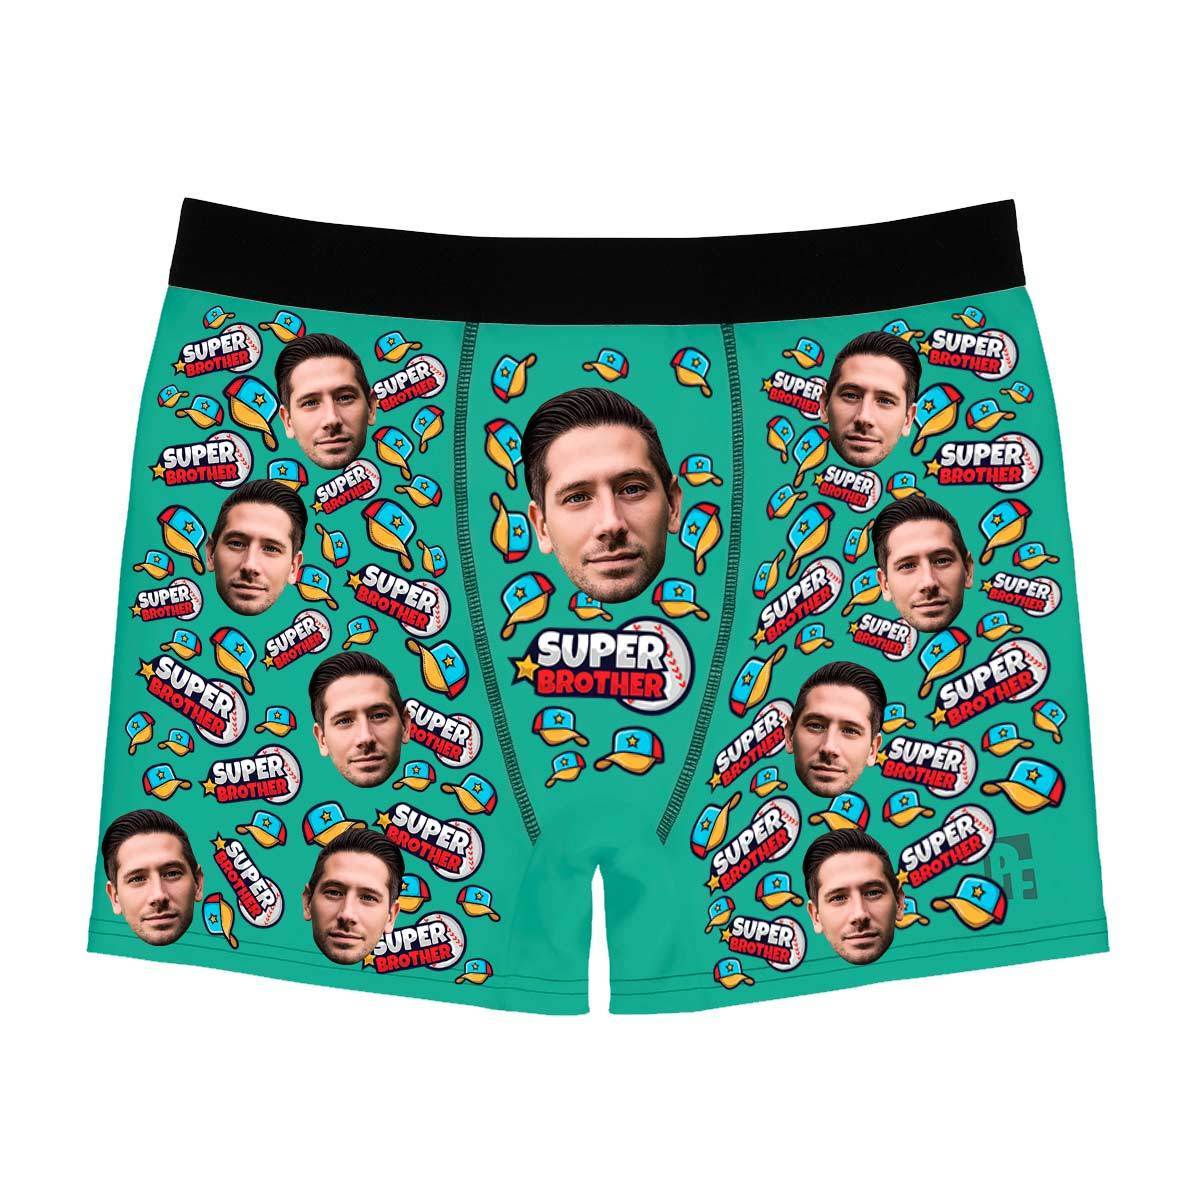 Mint Super Brother men's boxer briefs personalized with photo printed on them